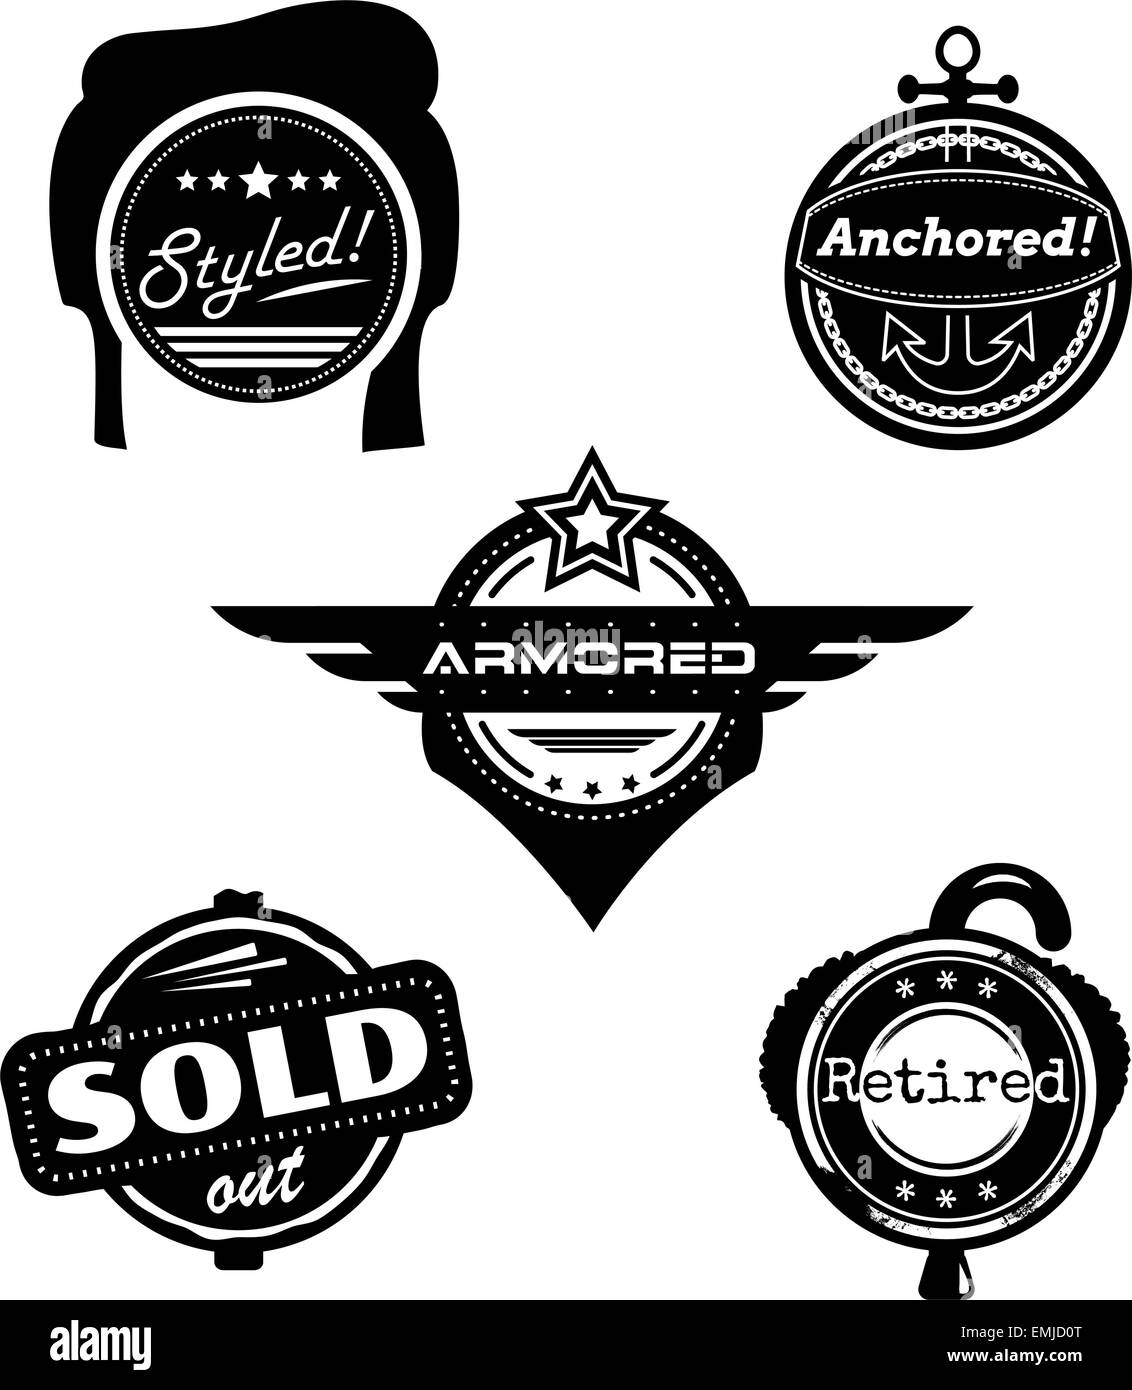 Set of themed vector badges styled retired armored sold anchored Stock Vector